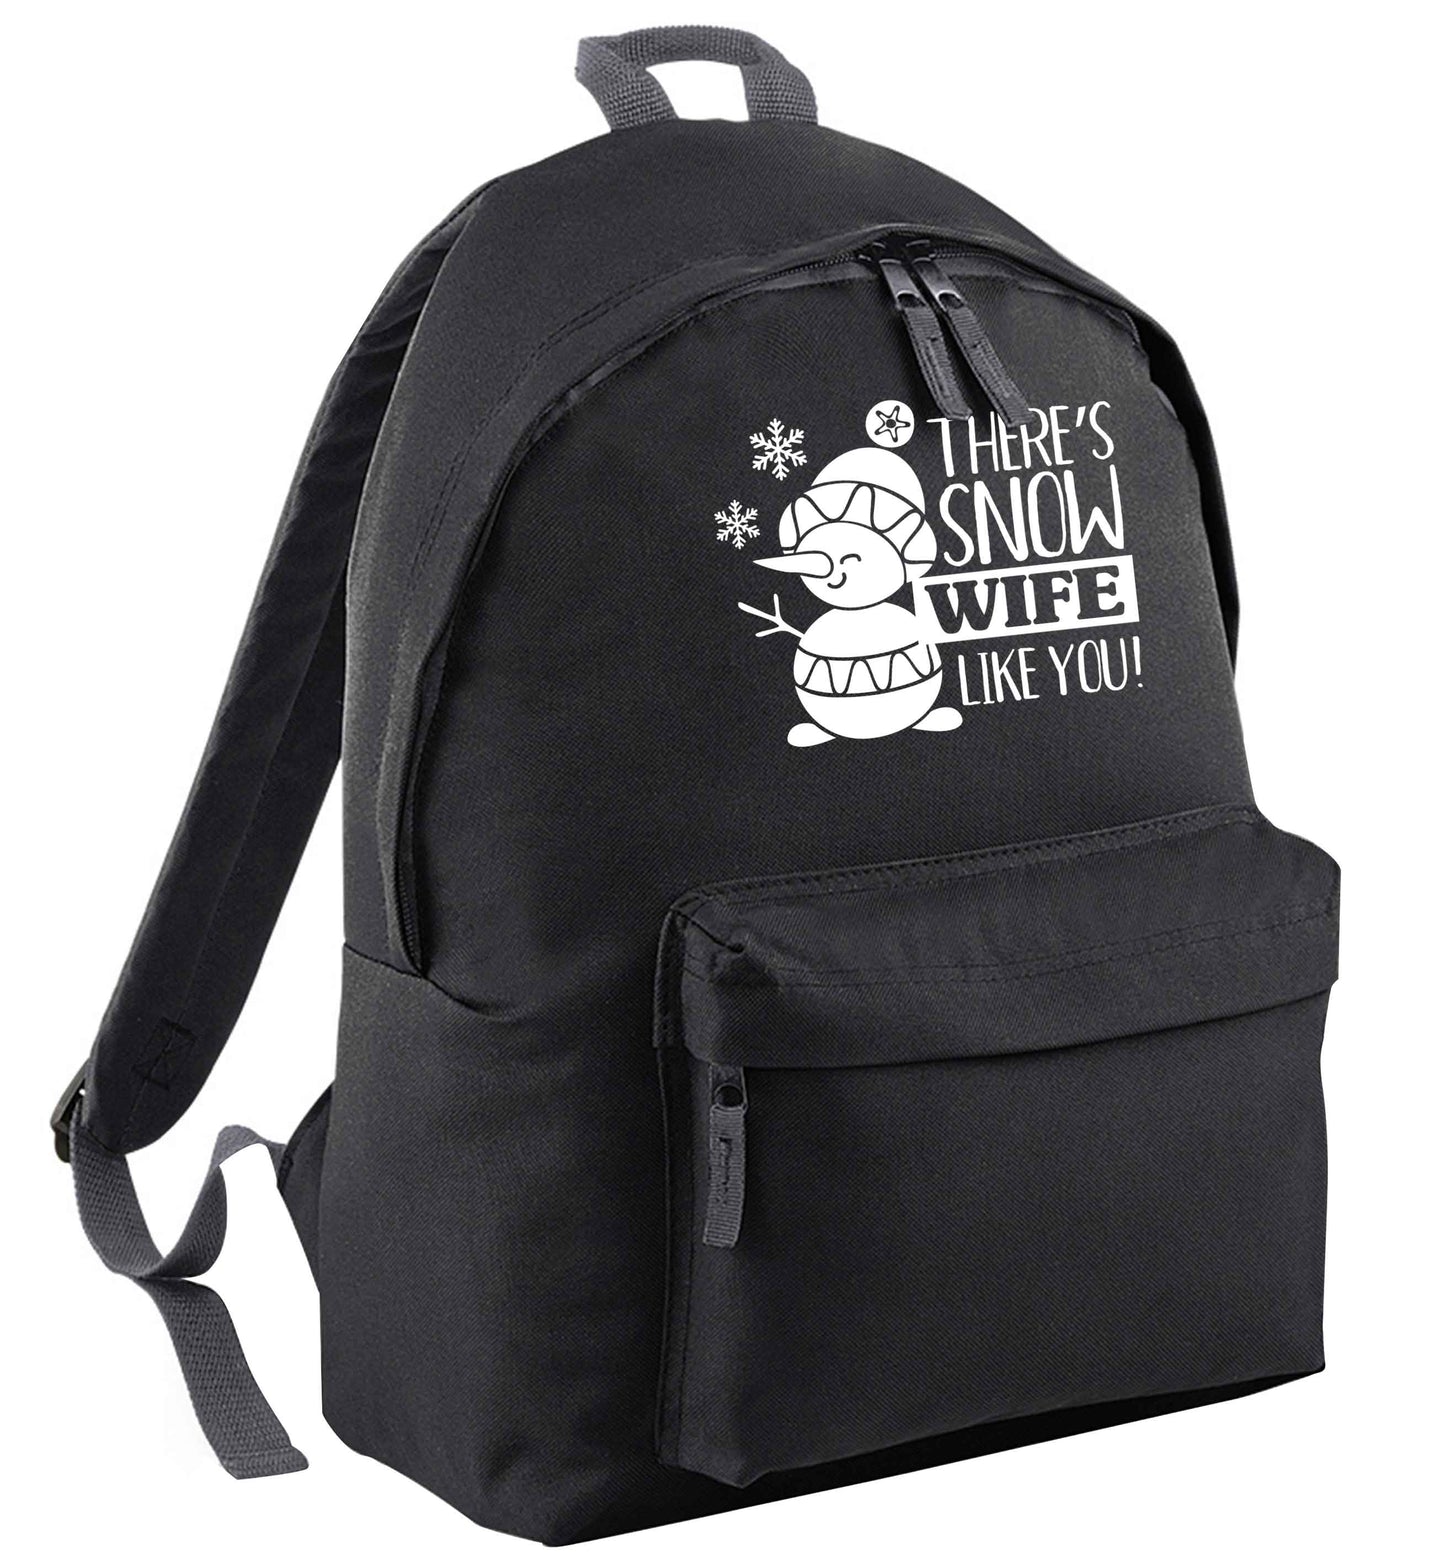 There's snow wife like you black adults backpack